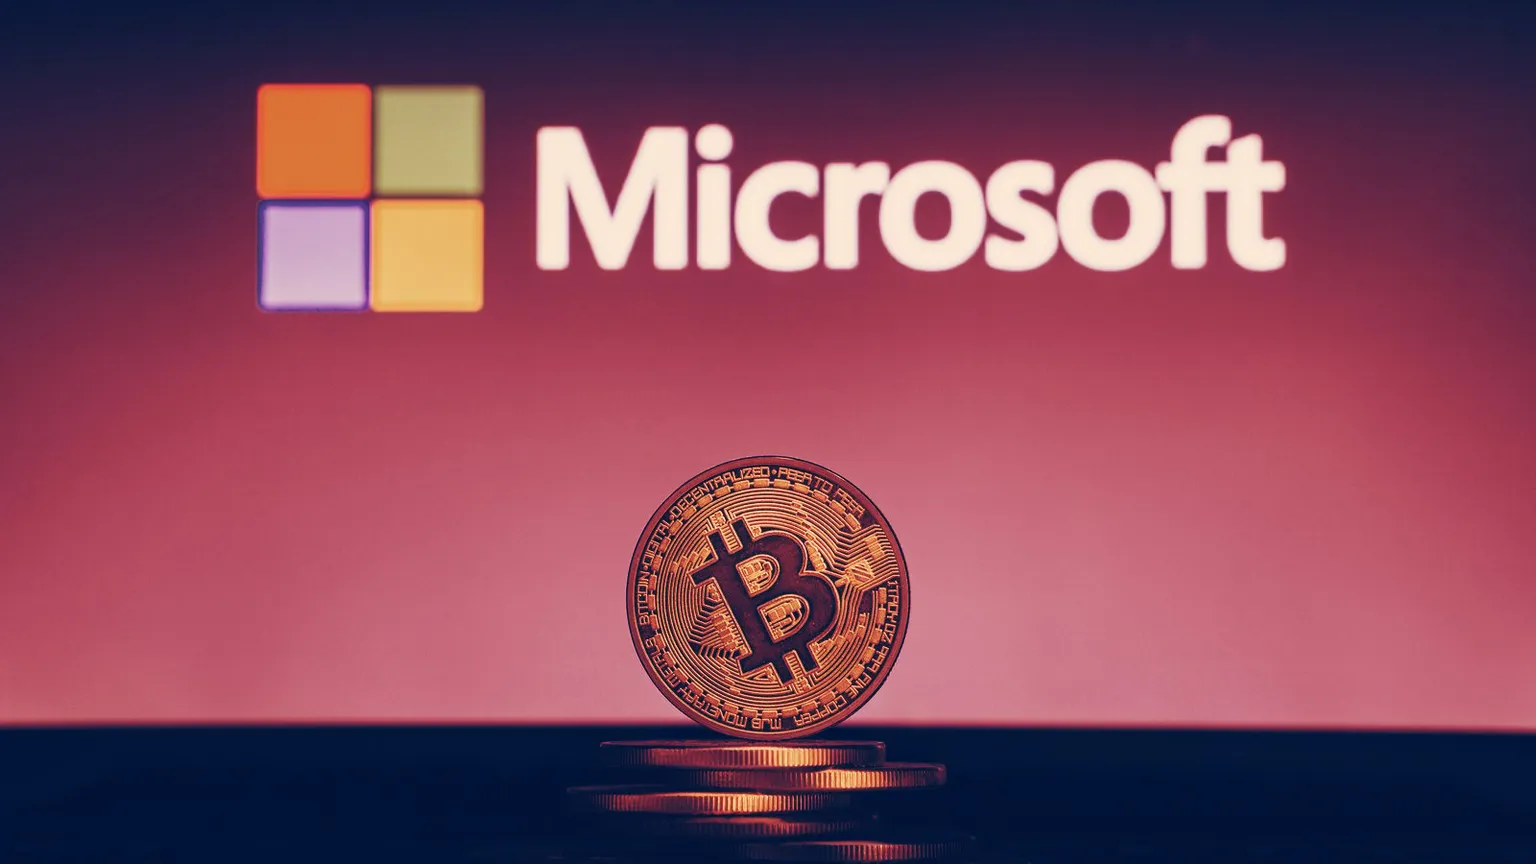 Microsoft has announced the launch of its open-source decentralized identifiers network on Bitcoin’s blockchain. Image: Shutterstock